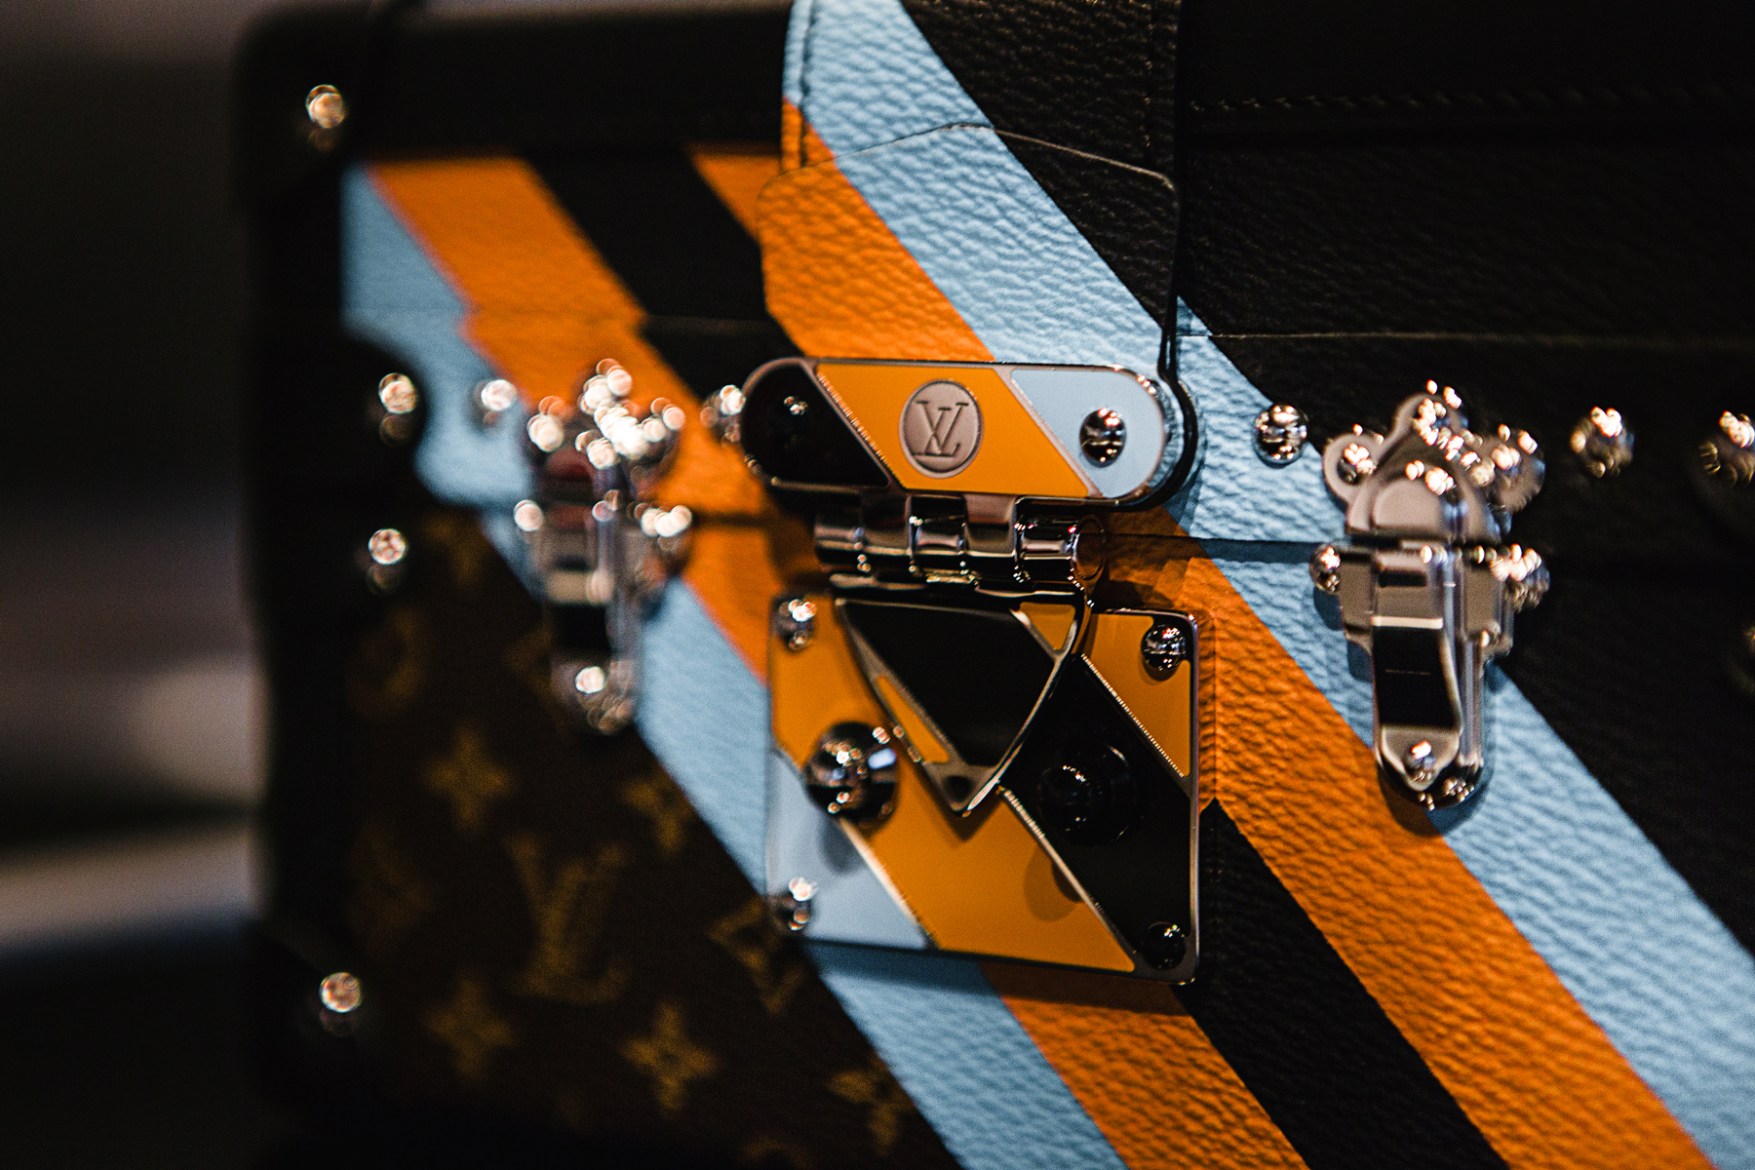 Louis Vuitton - A Petite Malle from the Louis Vuitton Cruise 2016